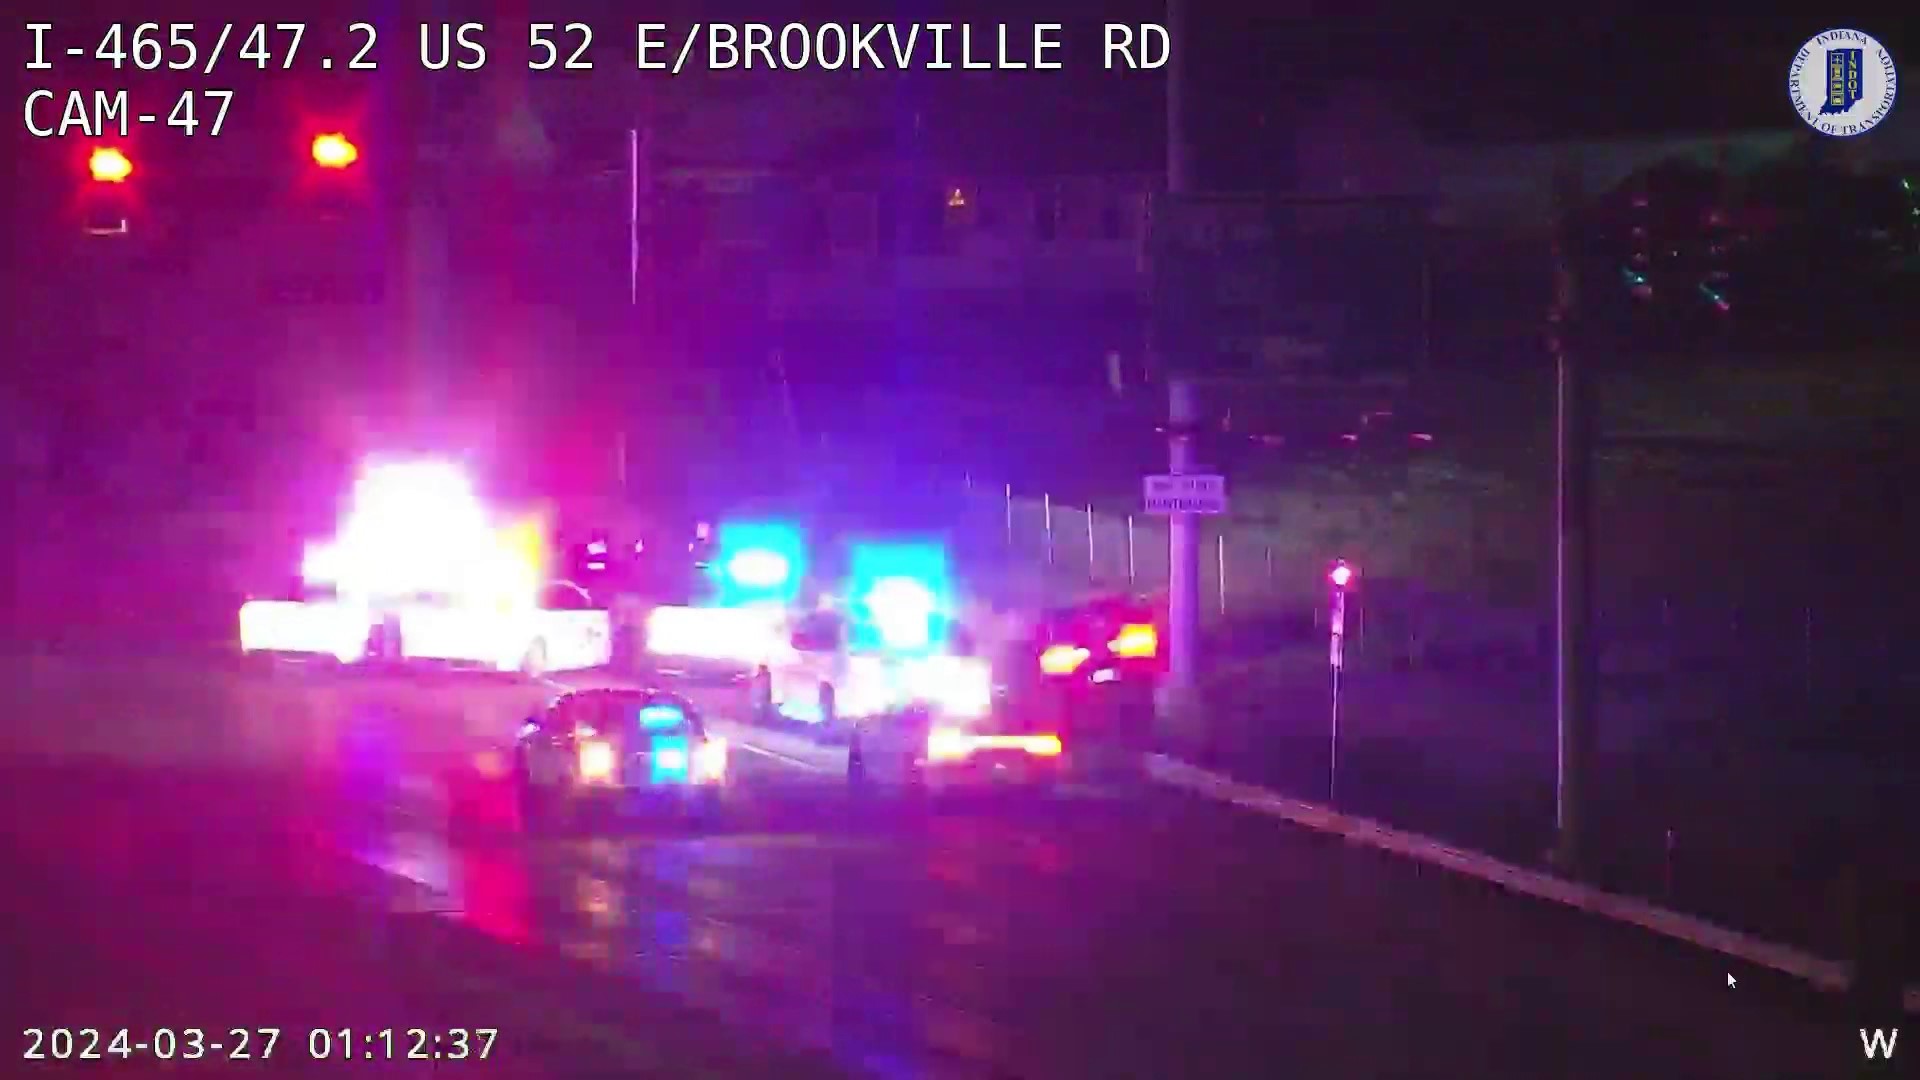 The car crashed as it was exiting I-465 near Brookville Road, and two people were taken into custody, police confirmed to 13News.